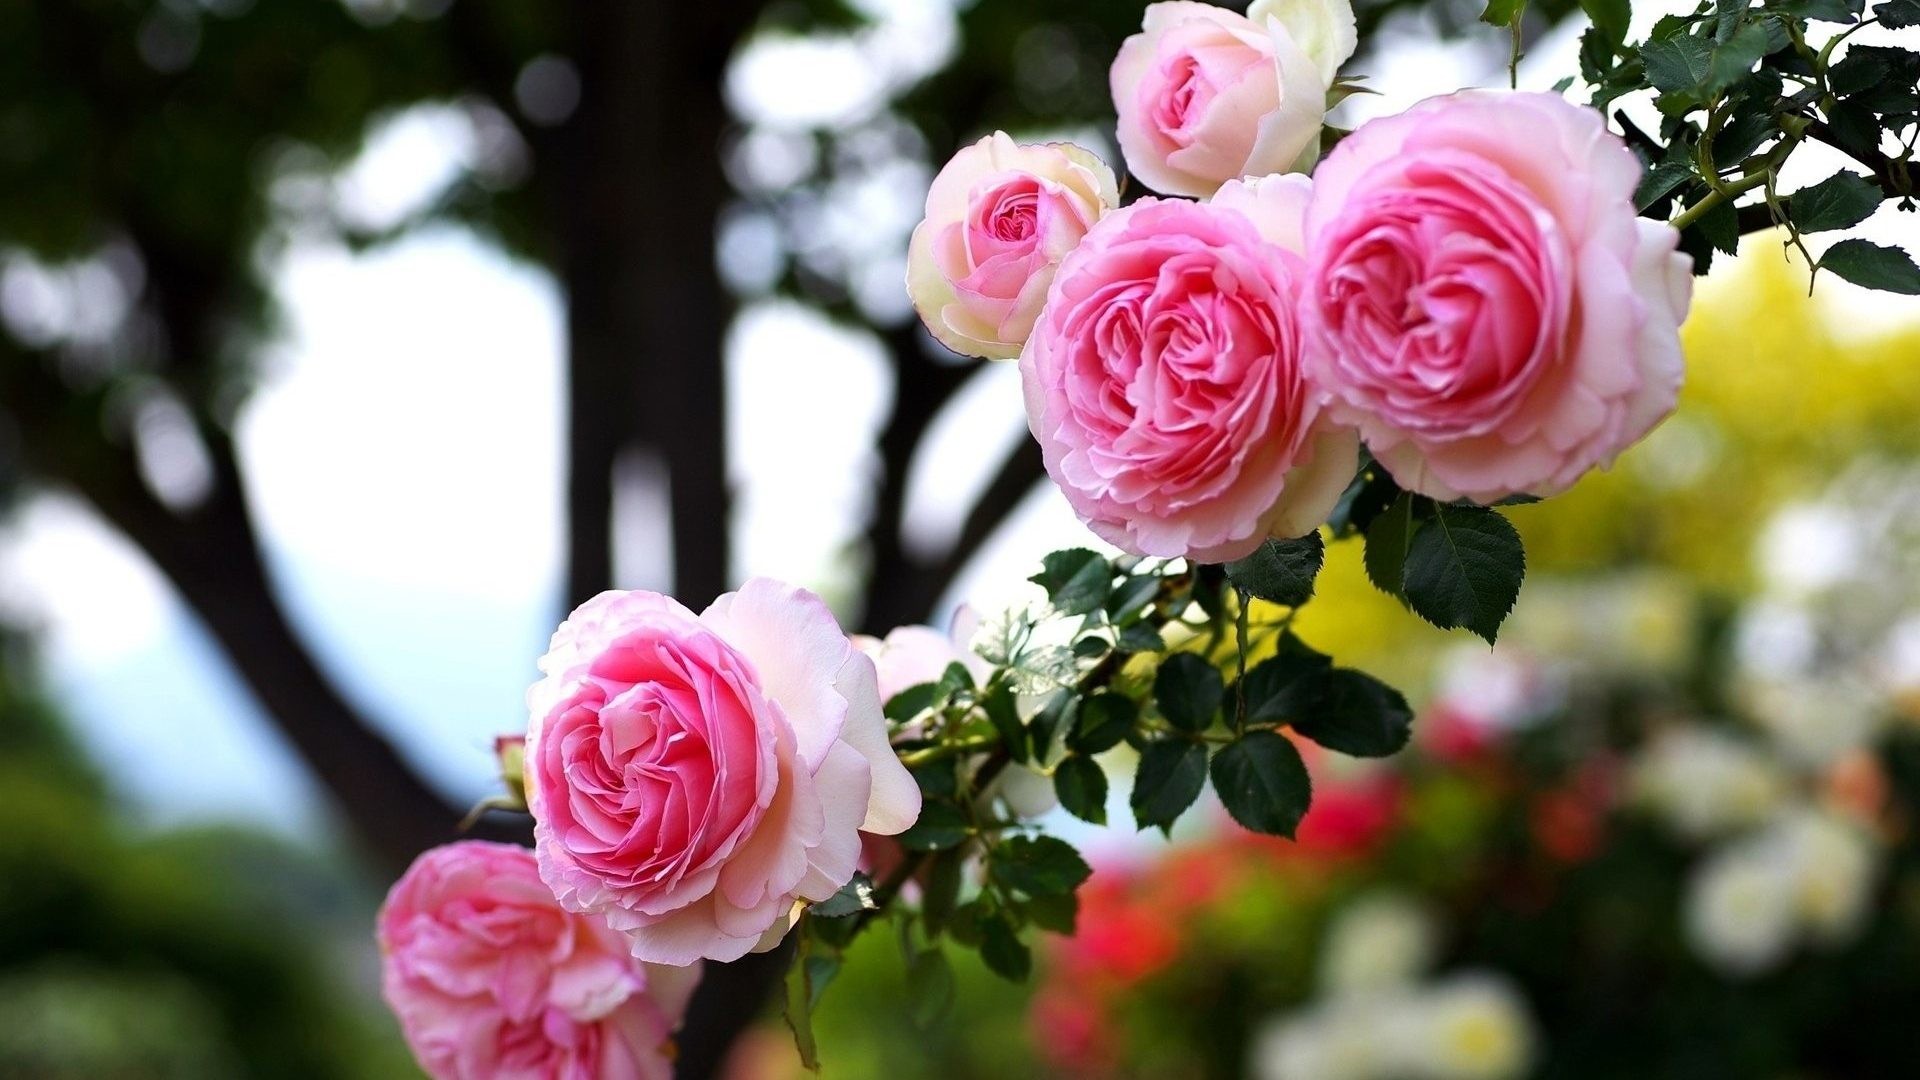 3D Rose Live Wallpaper Free - Android Apps on Google Play